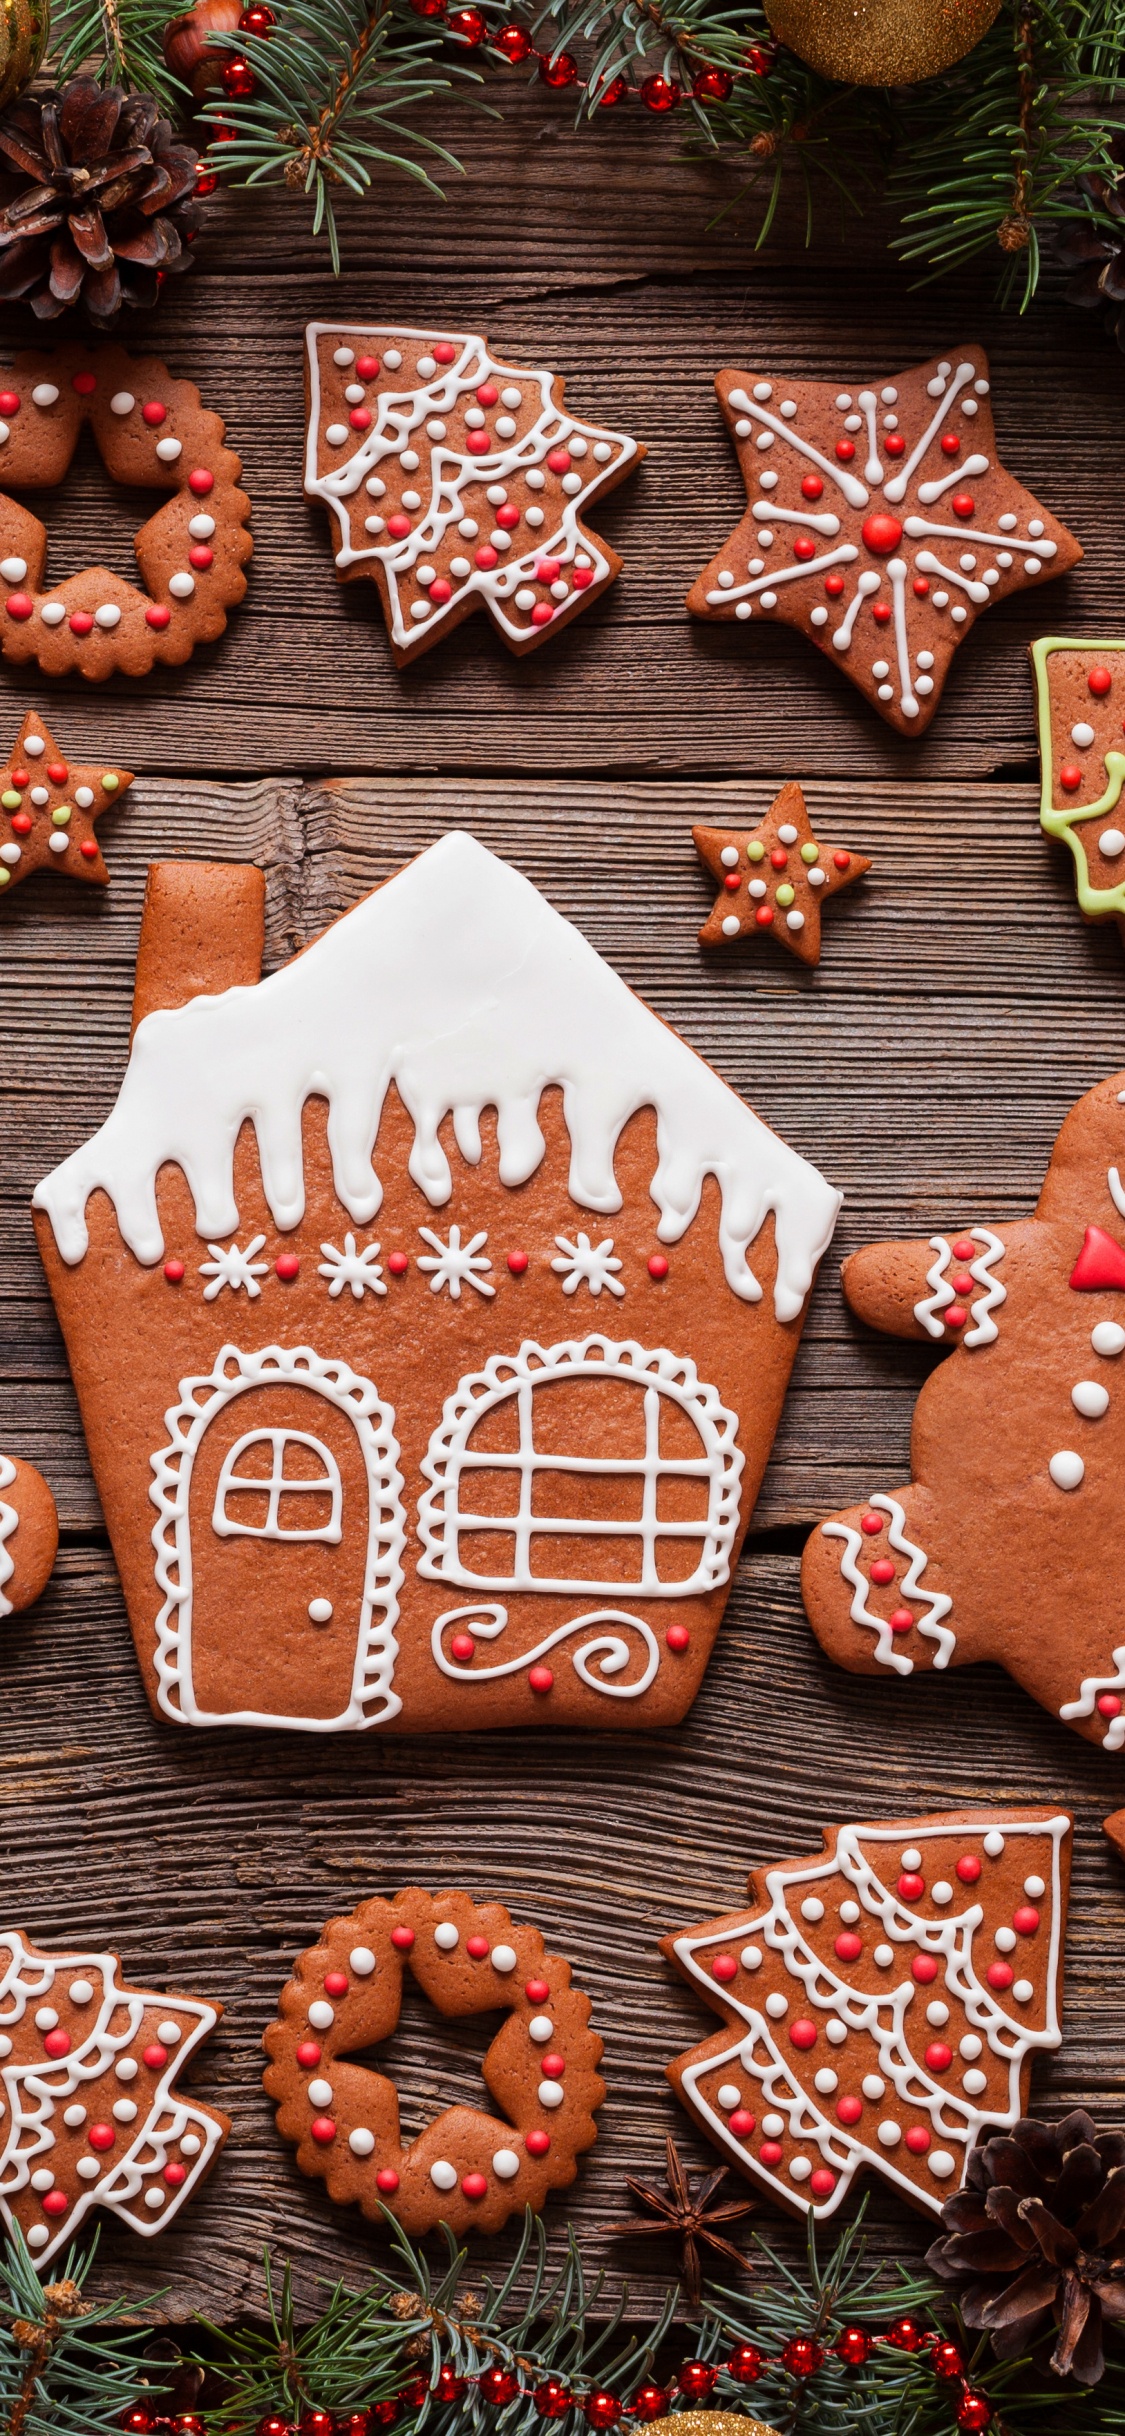 Gingerbread House, Christmas Day, Gingerbread Man, New Year, Christmas Tree. Wallpaper in 1125x2436 Resolution